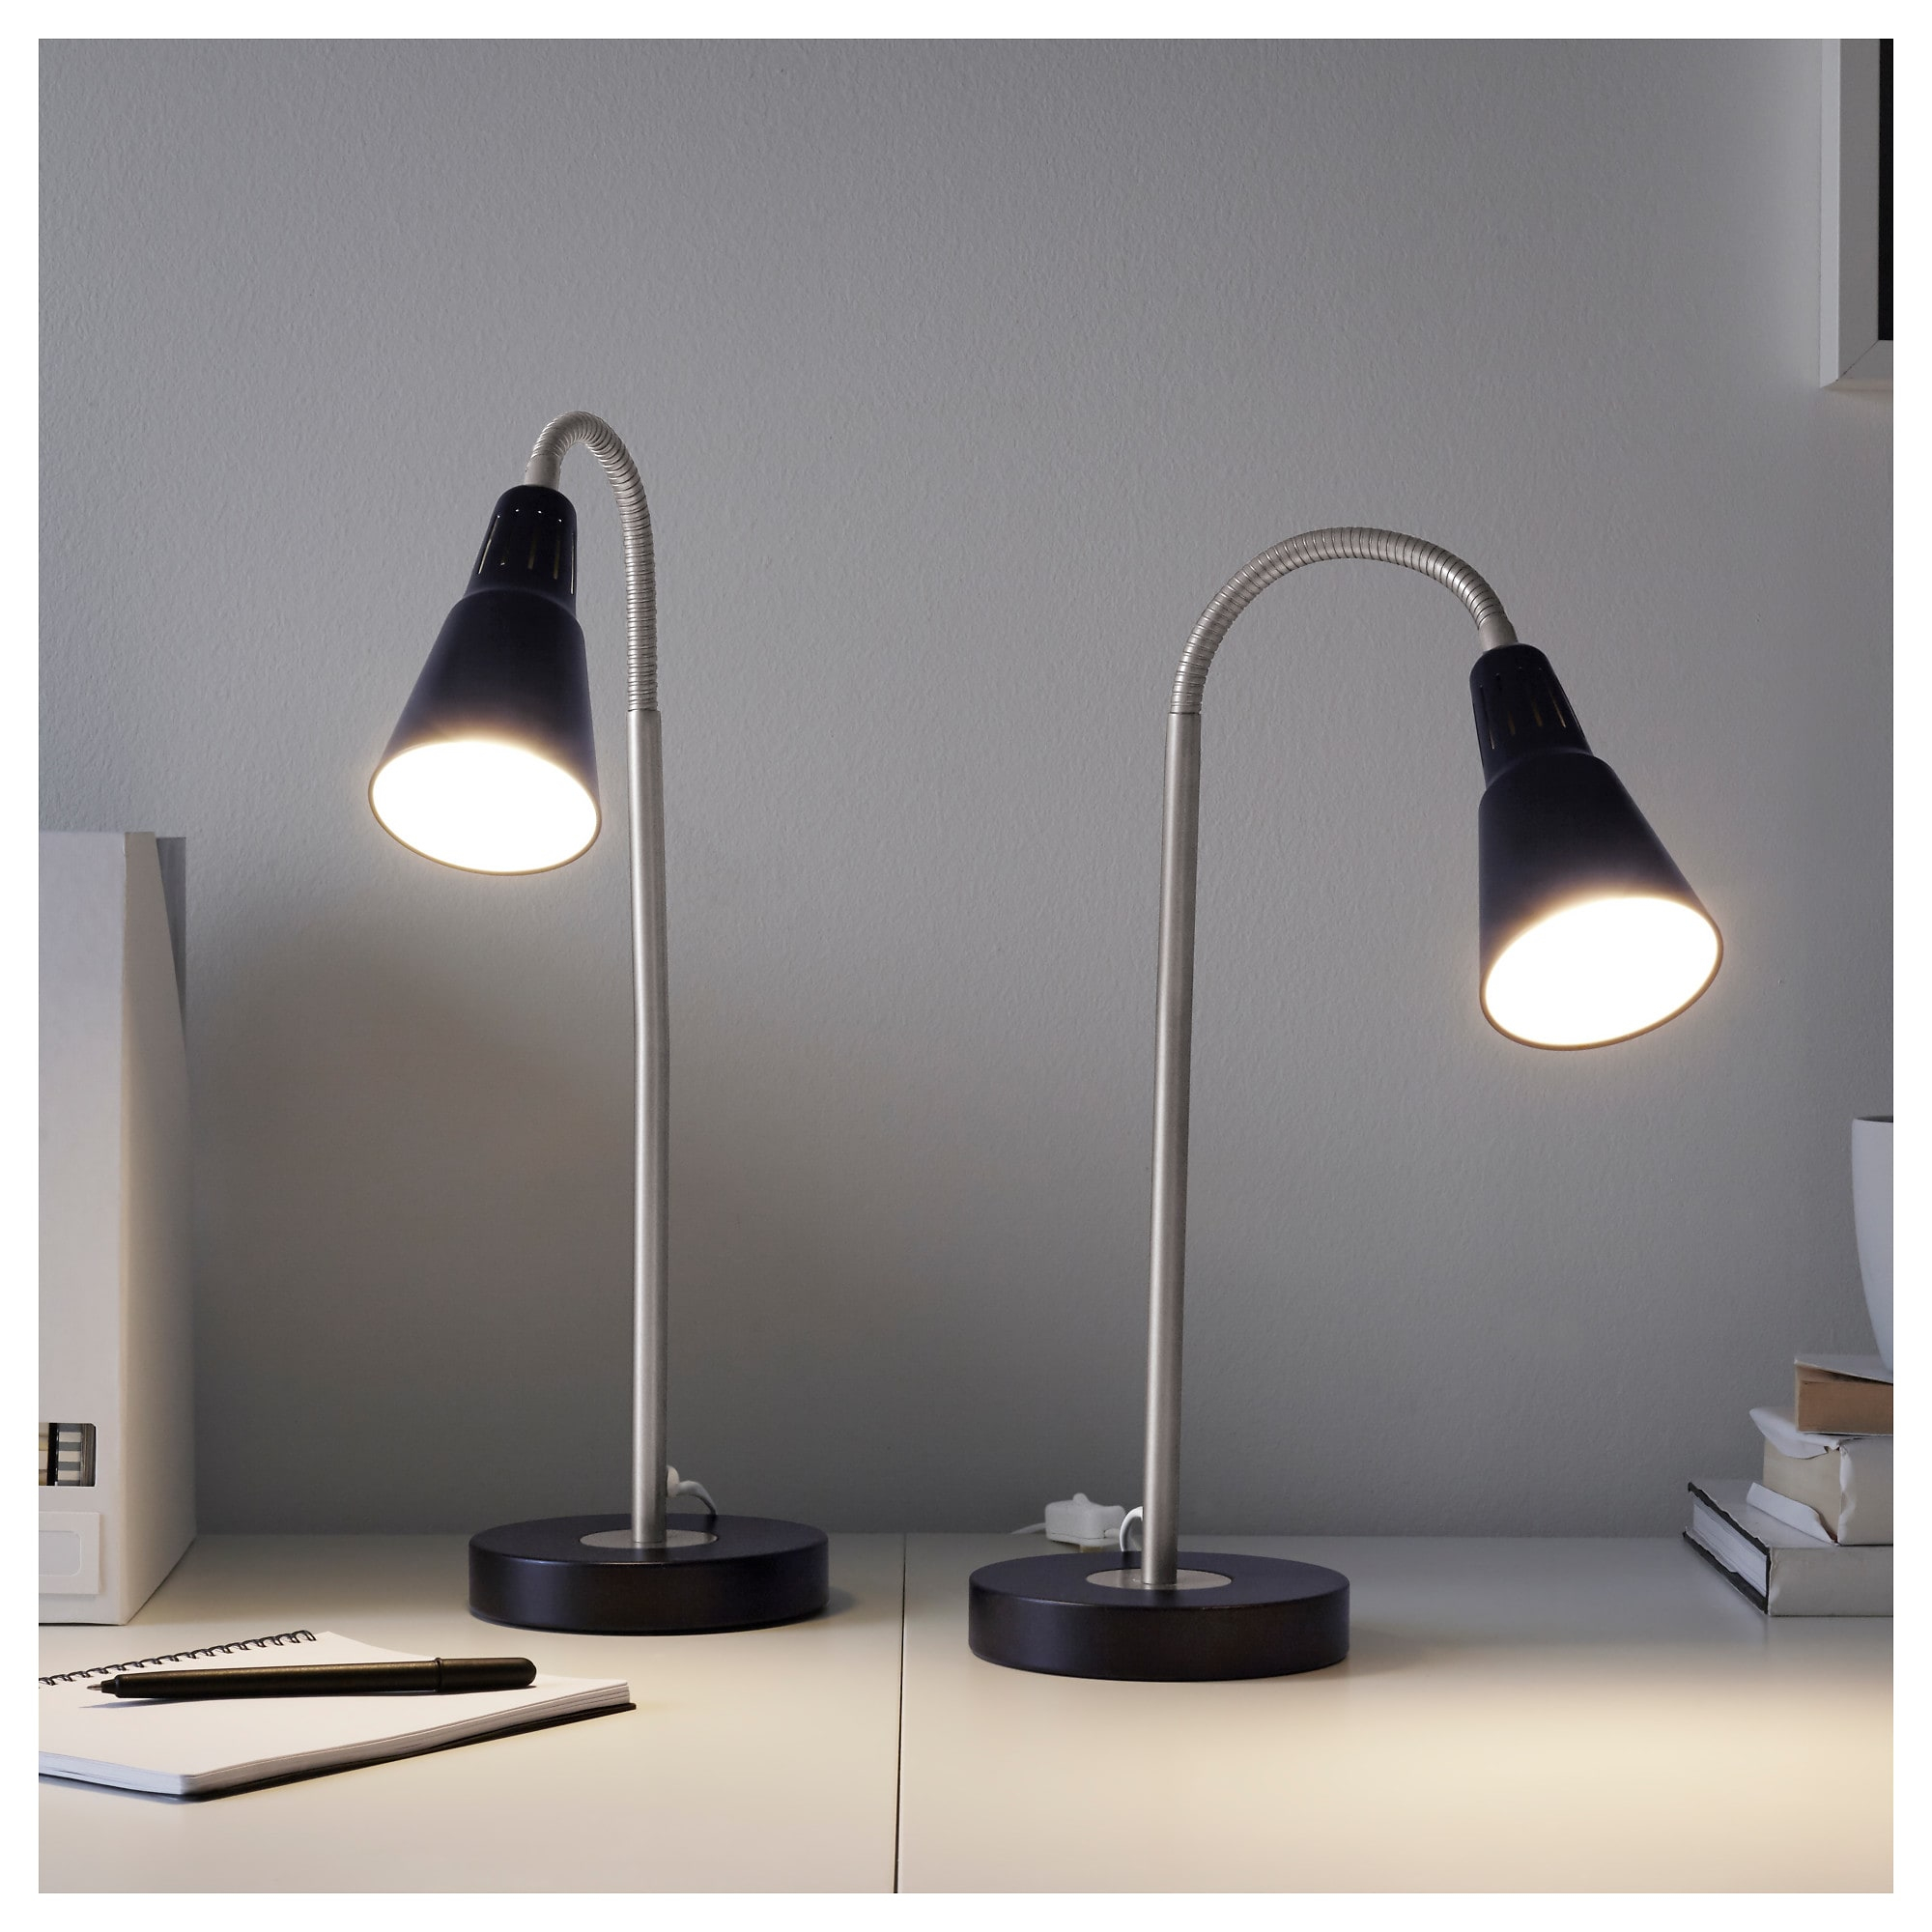 Kvart Arbeitsleuchte Schwarz In 2019 Products Lamp Light within sizing 2000 X 2000